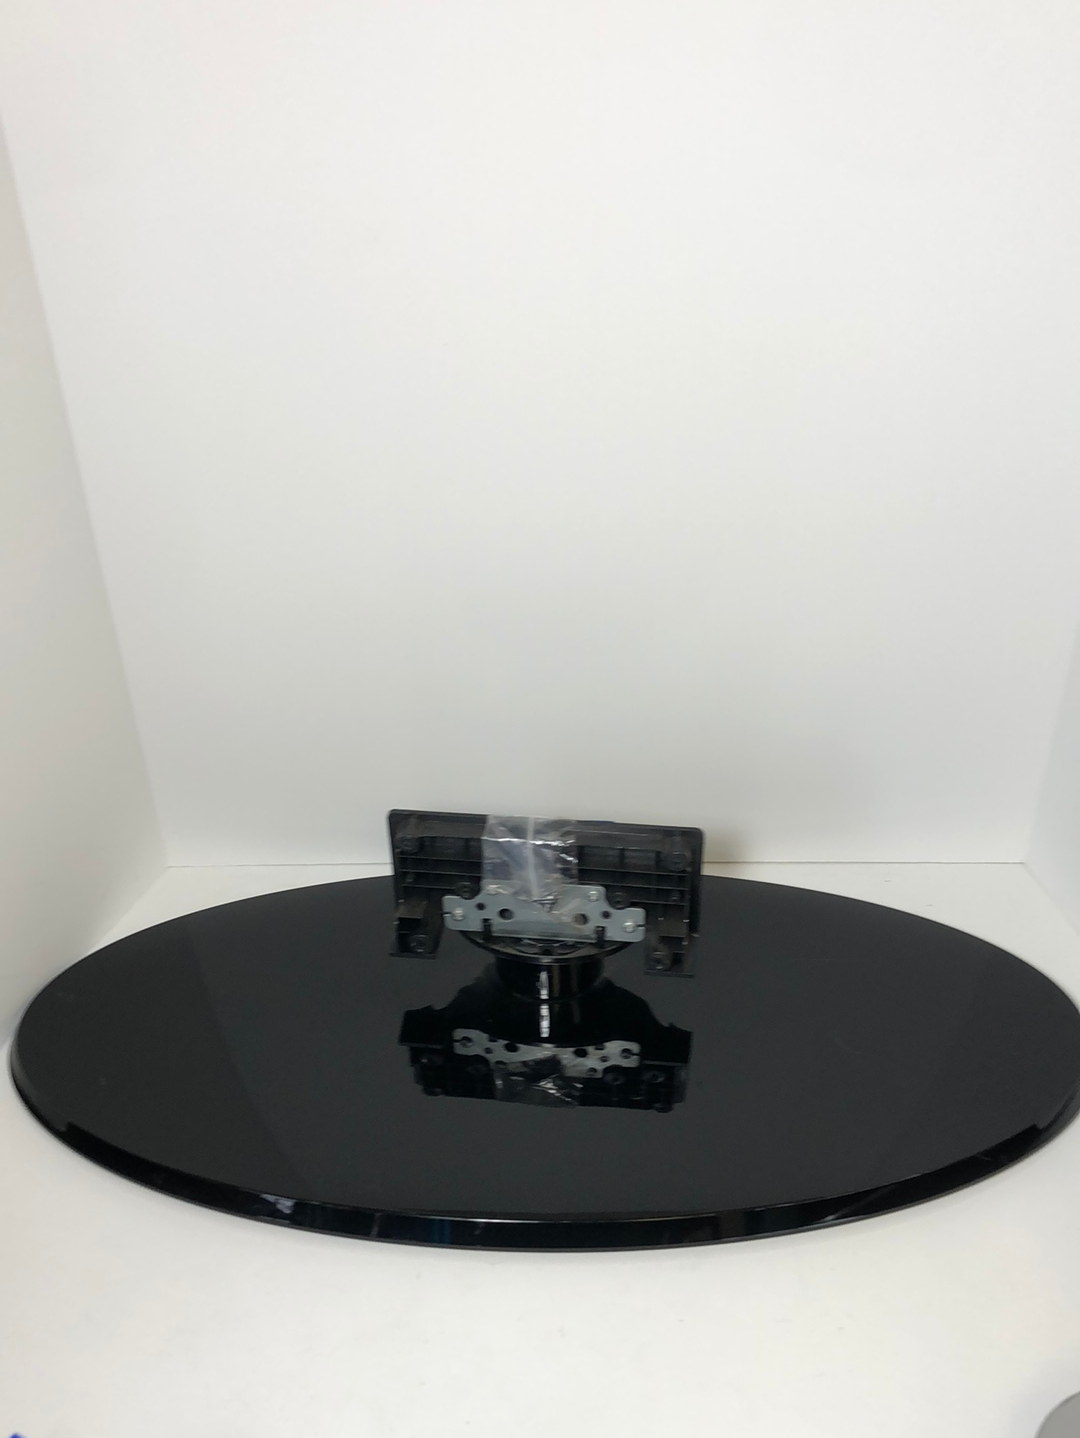 Westinghouse VR-4090 TV Stand/Base